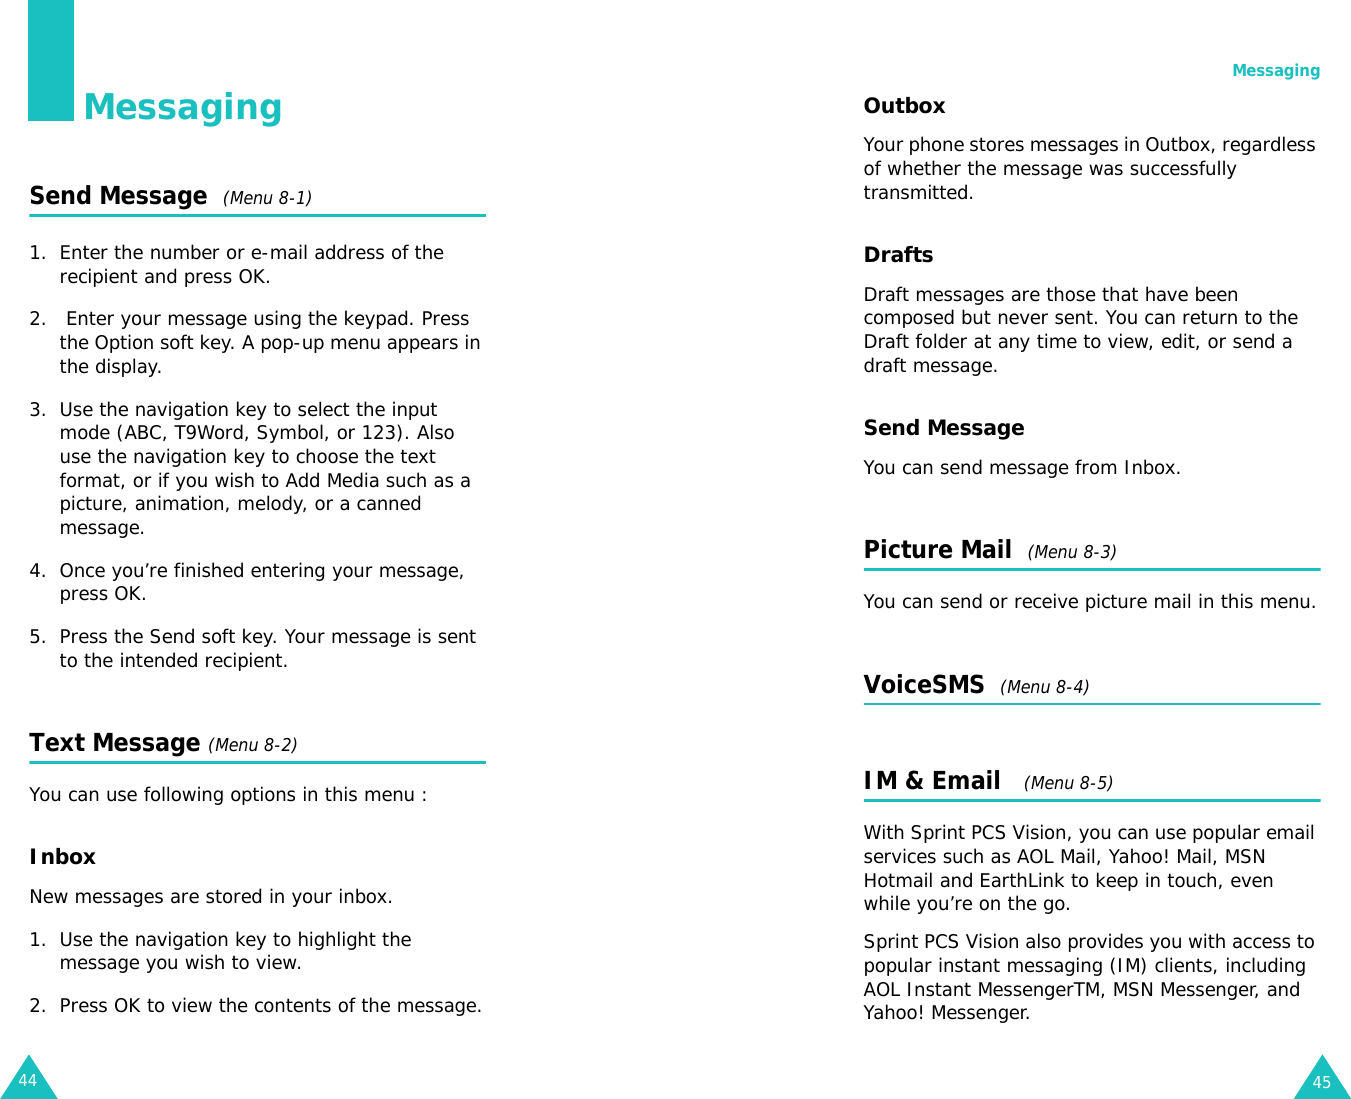 44MessagingSend Message  (Menu 8-1)1. Enter the number or e-mail address of the recipient and press OK.2.  Enter your message using the keypad. Press the Option soft key. A pop-up menu appears in the display.3. Use the navigation key to select the input mode (ABC, T9Word, Symbol, or 123). Also use the navigation key to choose the text format, or if you wish to Add Media such as a picture, animation, melody, or a canned message.4. Once you’re finished entering your message, press OK.5. Press the Send soft key. Your message is sent to the intended recipient.Text Message (Menu 8-2)You can use following options in this menu :InboxNew messages are stored in your inbox.1. Use the navigation key to highlight the message you wish to view.2. Press OK to view the contents of the message.Messaging45OutboxYour phone stores messages in Outbox, regardless of whether the message was successfully transmitted.DraftsDraft messages are those that have been composed but never sent. You can return to the Draft folder at any time to view, edit, or send a draft message.Send MessageYou can send message from Inbox.Picture Mail  (Menu 8-3) You can send or receive picture mail in this menu.VoiceSMS  (Menu 8-4)IM &amp; Email   (Menu 8-5)With Sprint PCS Vision, you can use popular email services such as AOL Mail, Yahoo! Mail, MSN Hotmail and EarthLink to keep in touch, even while you’re on the go.Sprint PCS Vision also provides you with access to popular instant messaging (IM) clients, including AOL Instant MessengerTM, MSN Messenger, and Yahoo! Messenger.